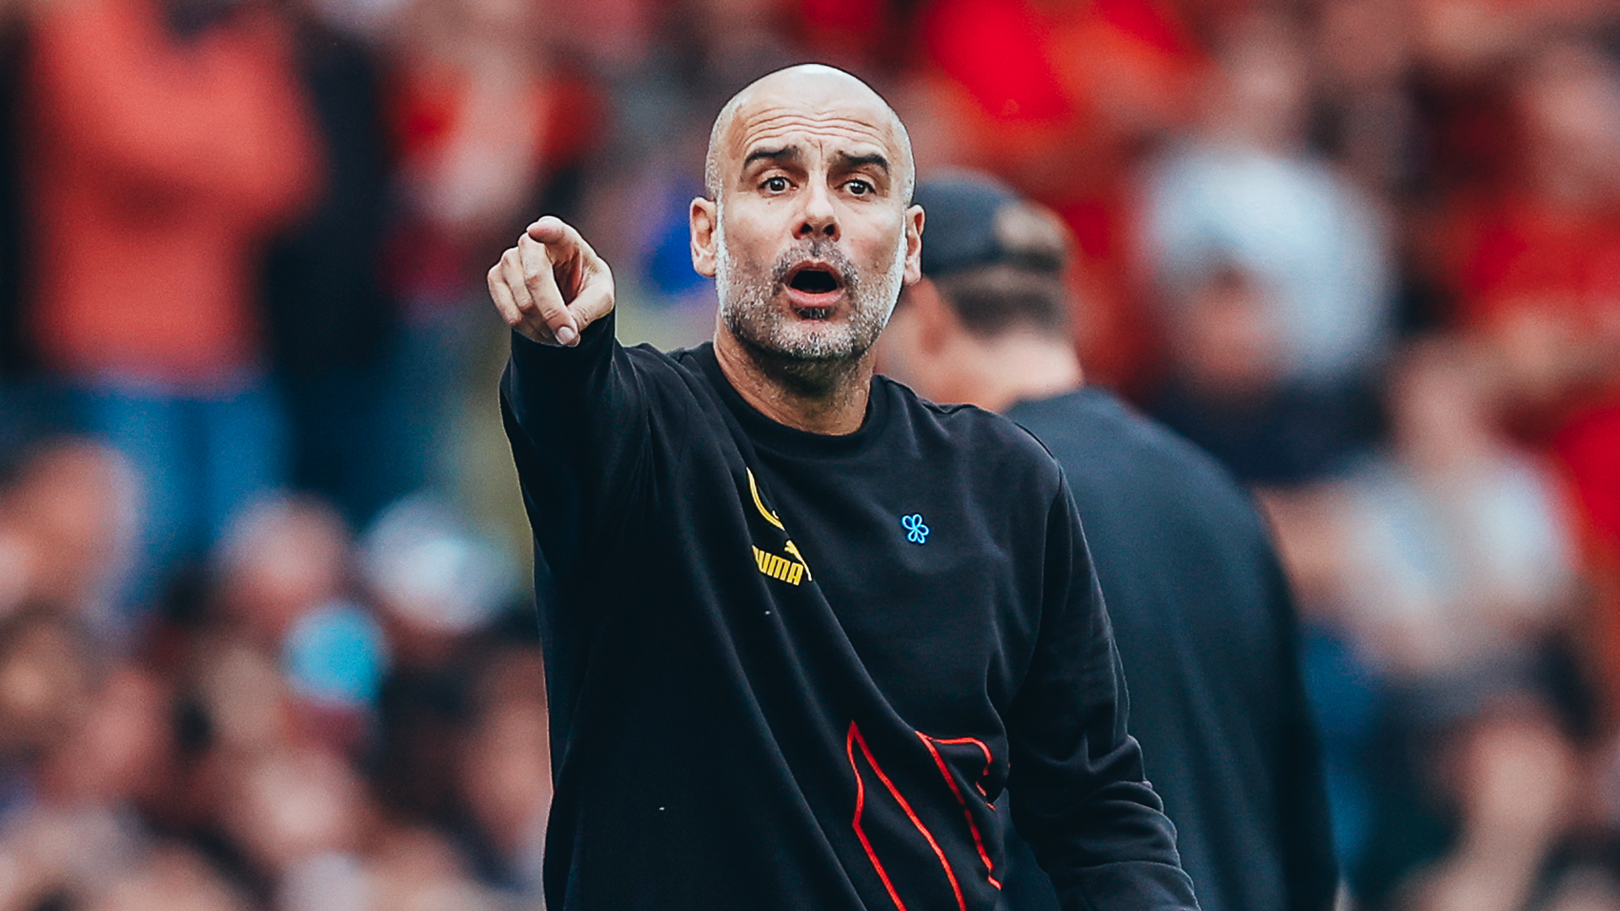 Guardiola: City's players gave everything